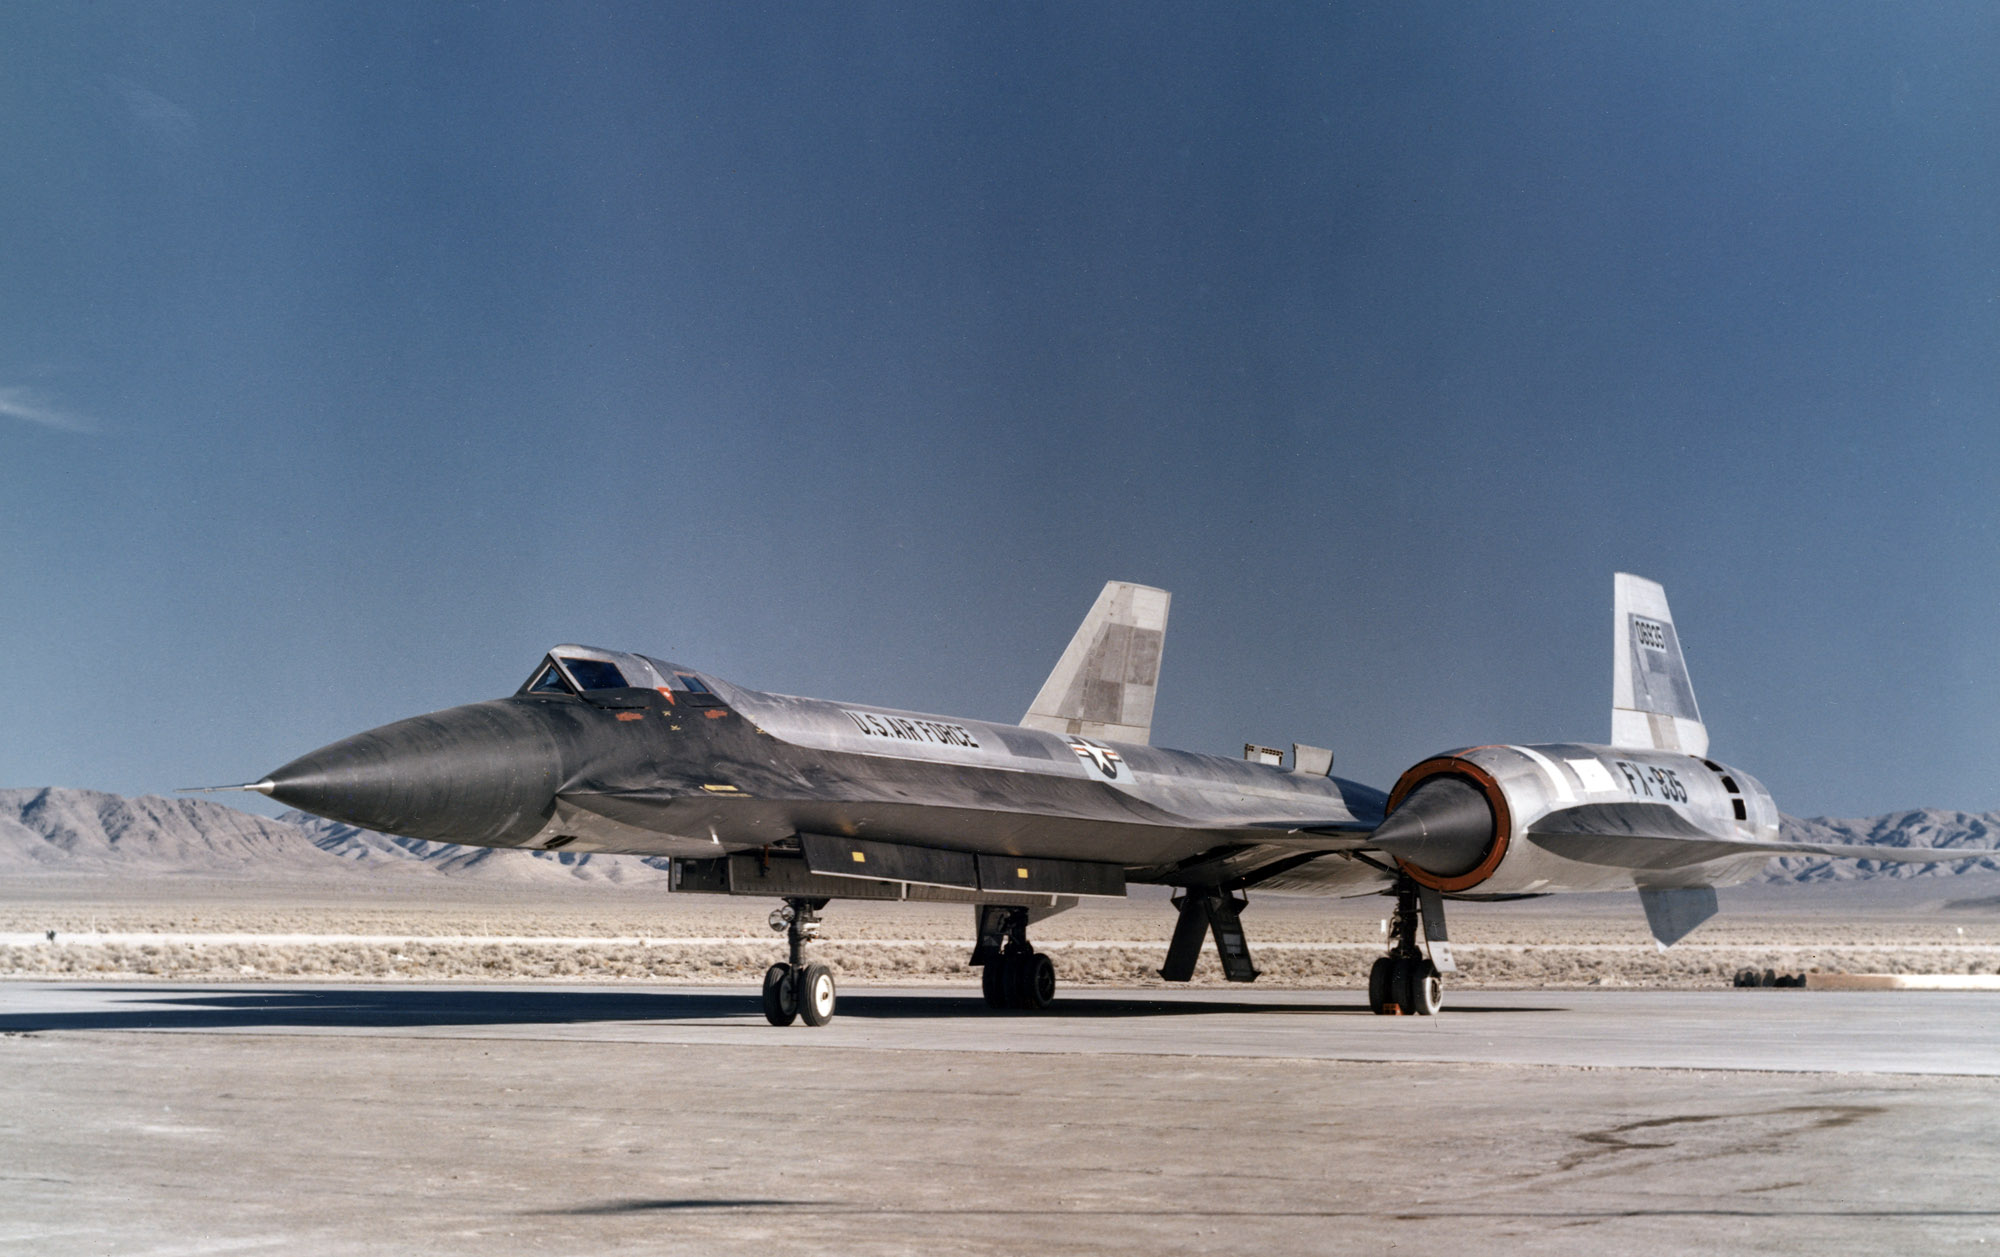 The second of three Lockheed YF-12A’s parked on the ramp after a recent test mission.